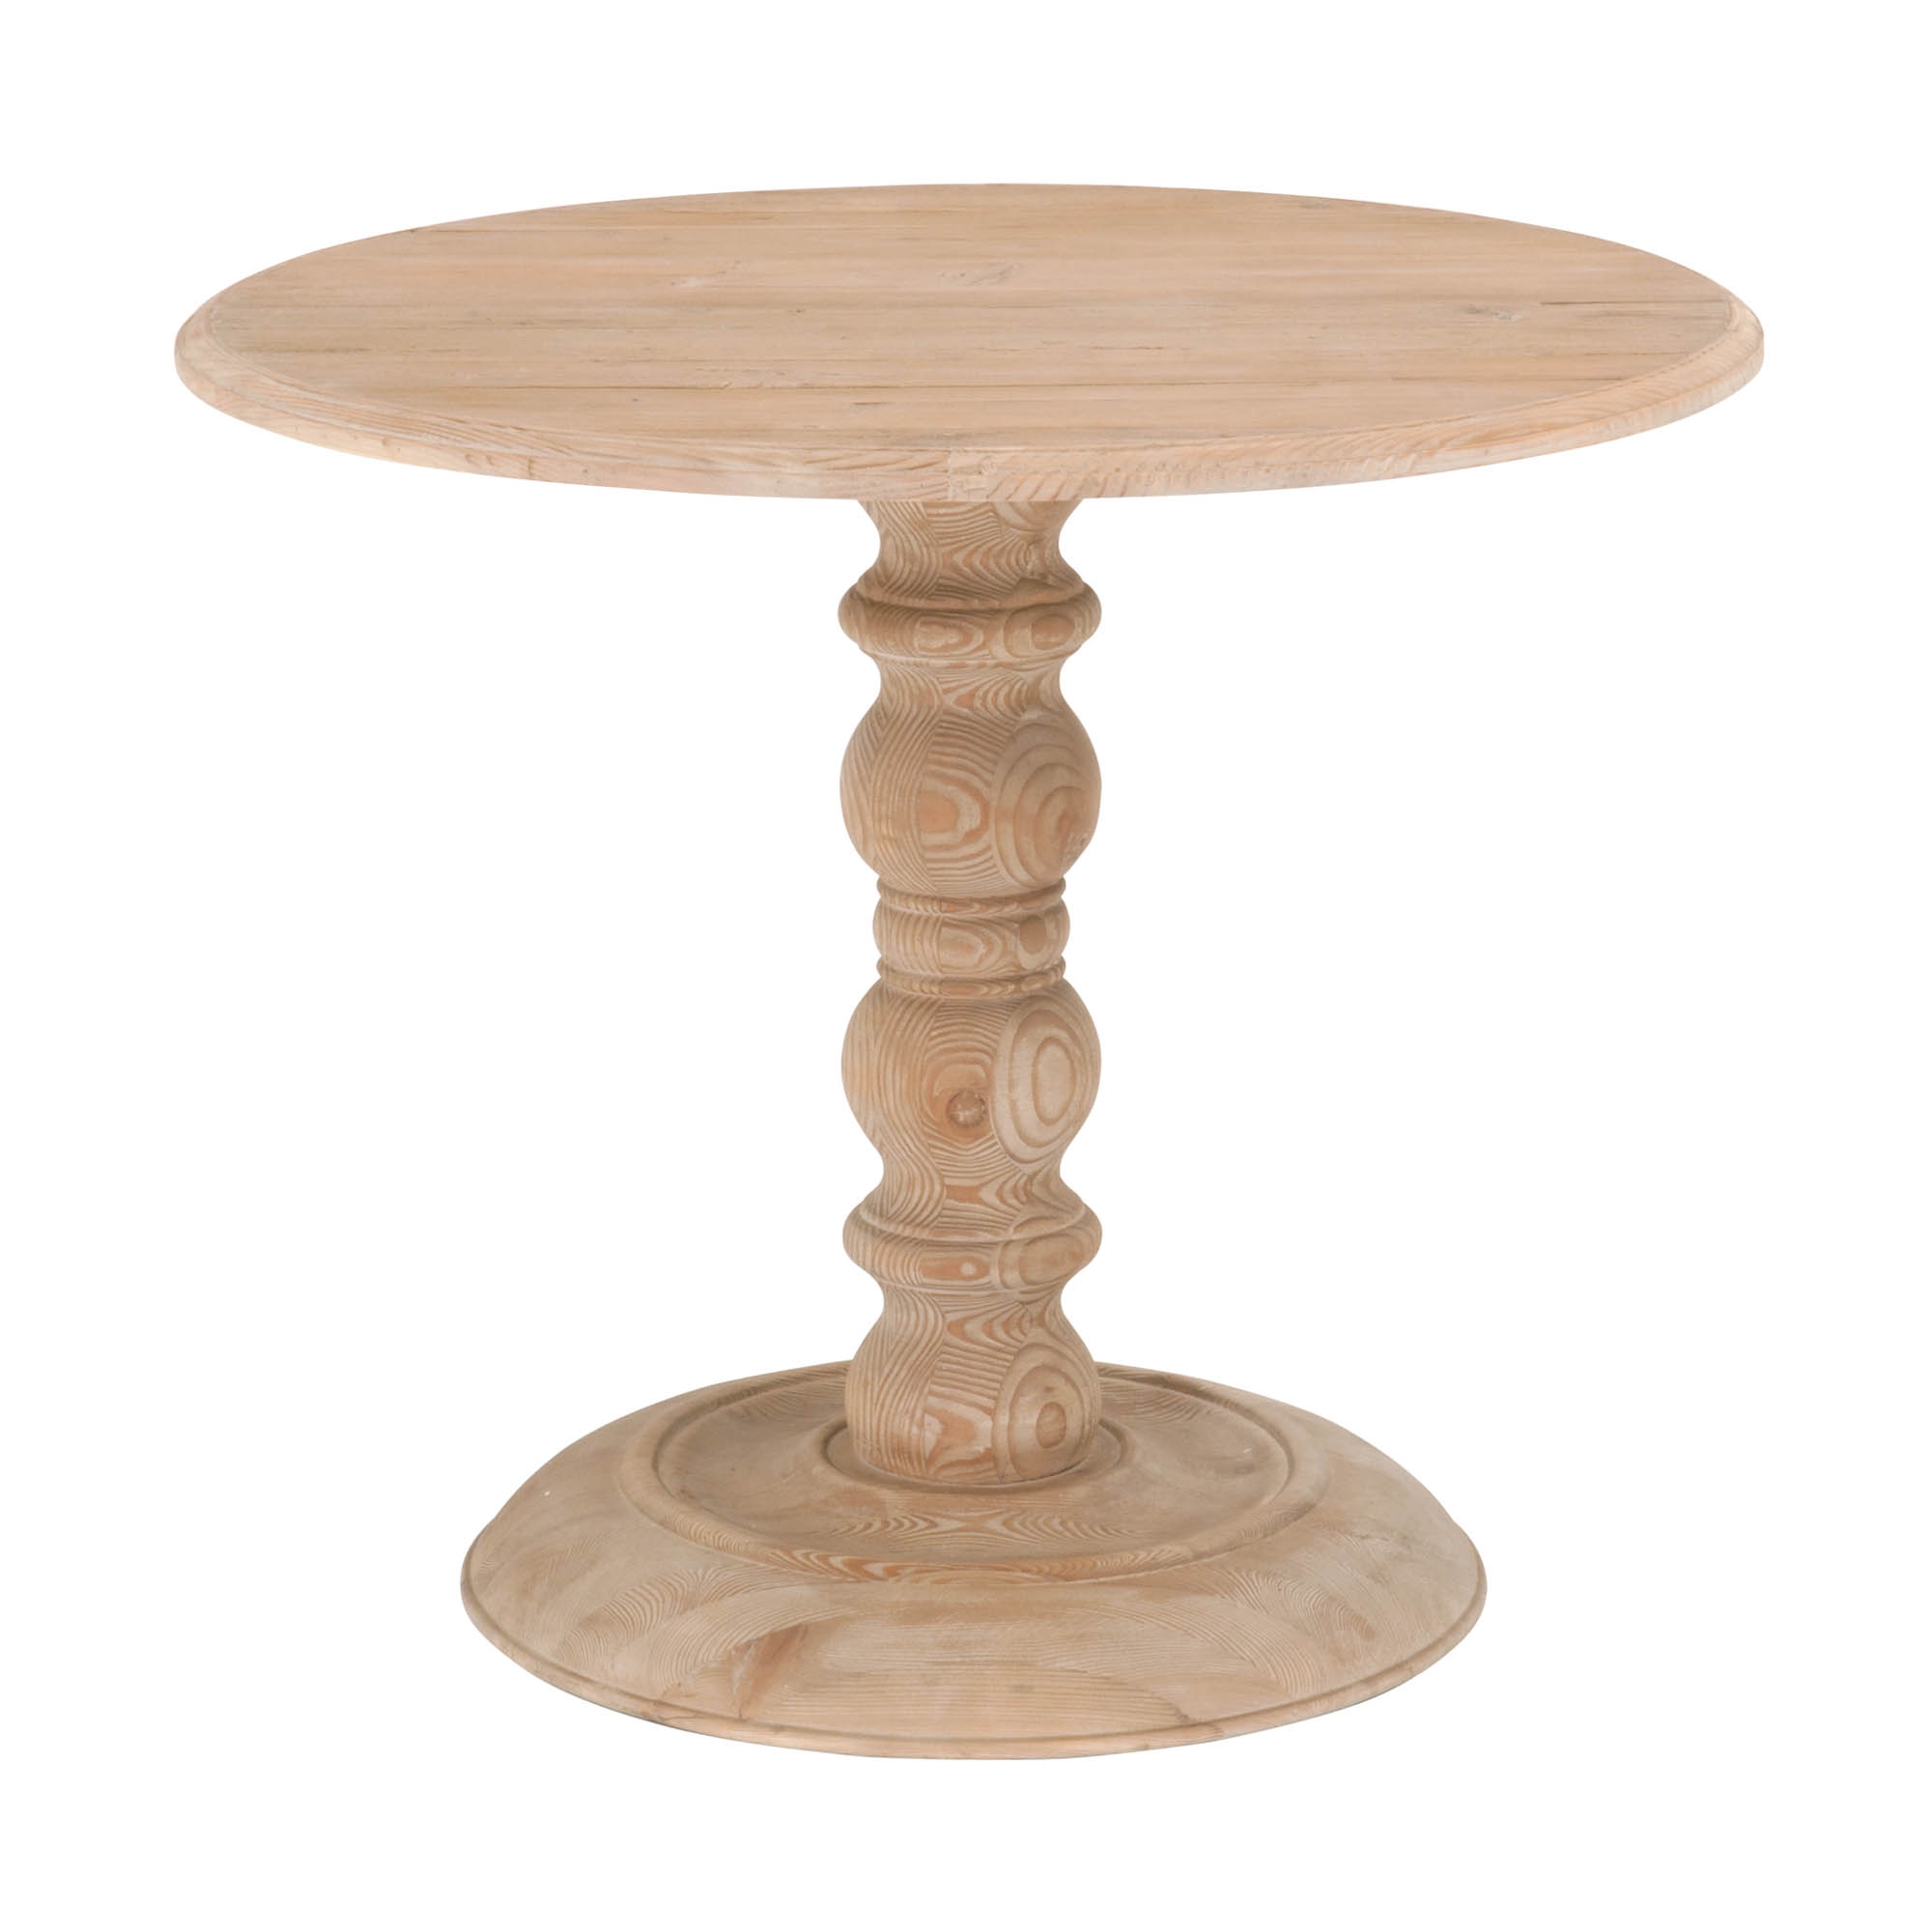 Elowen Round Dining Table, 36" - Image 0